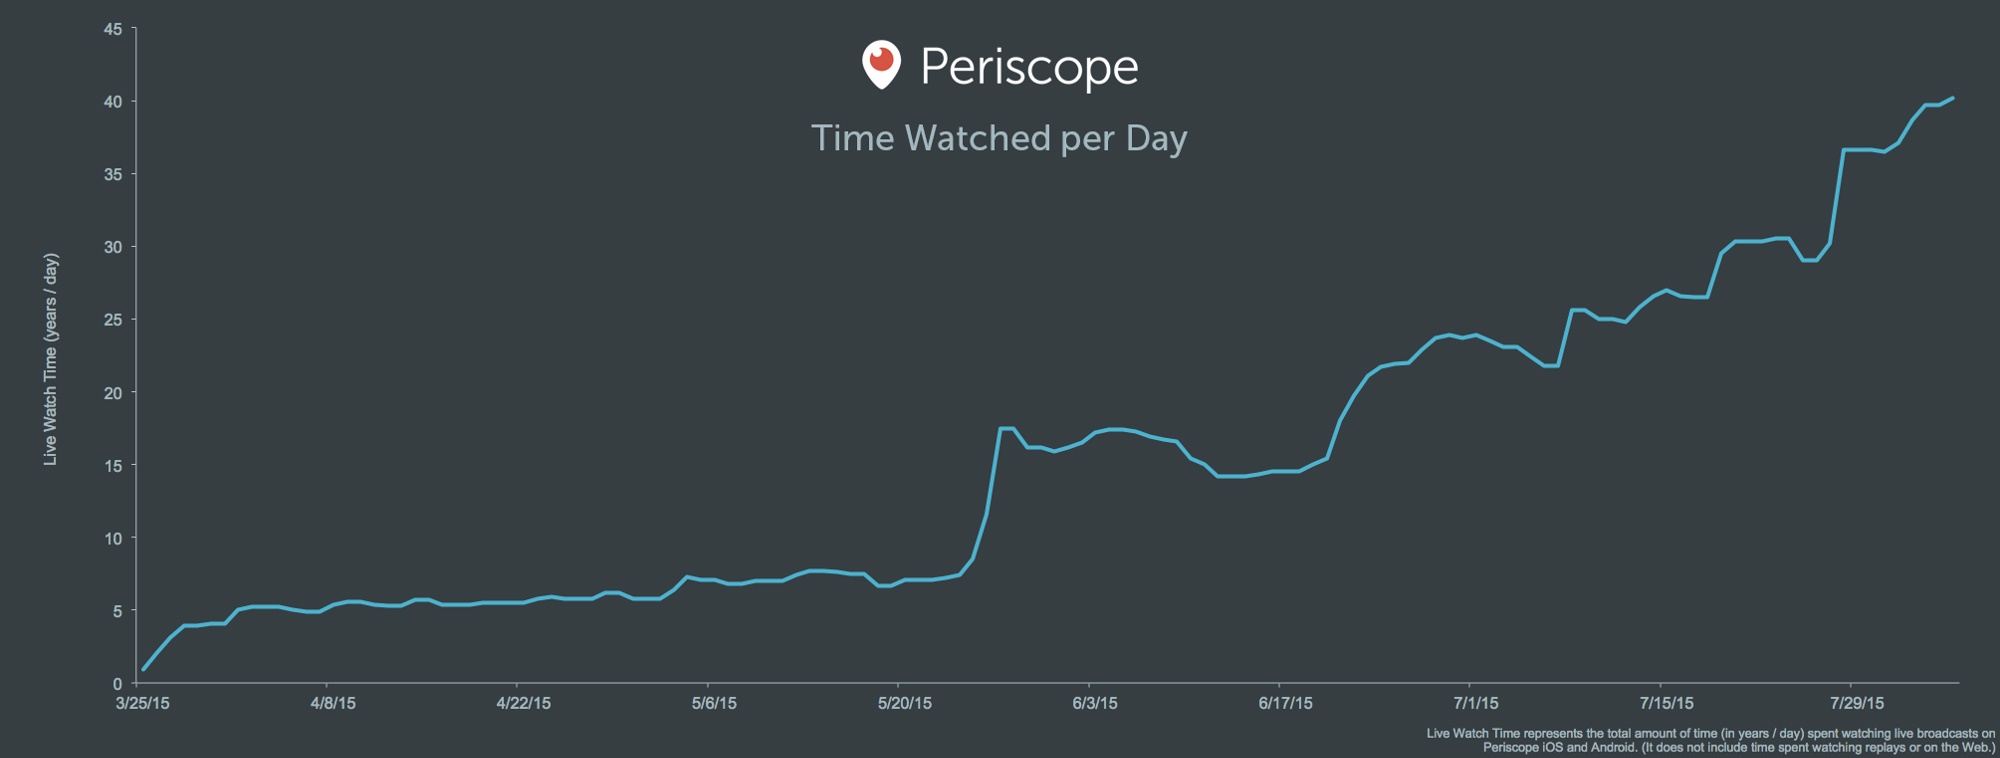 periscope-time-watched-per-day.jpg